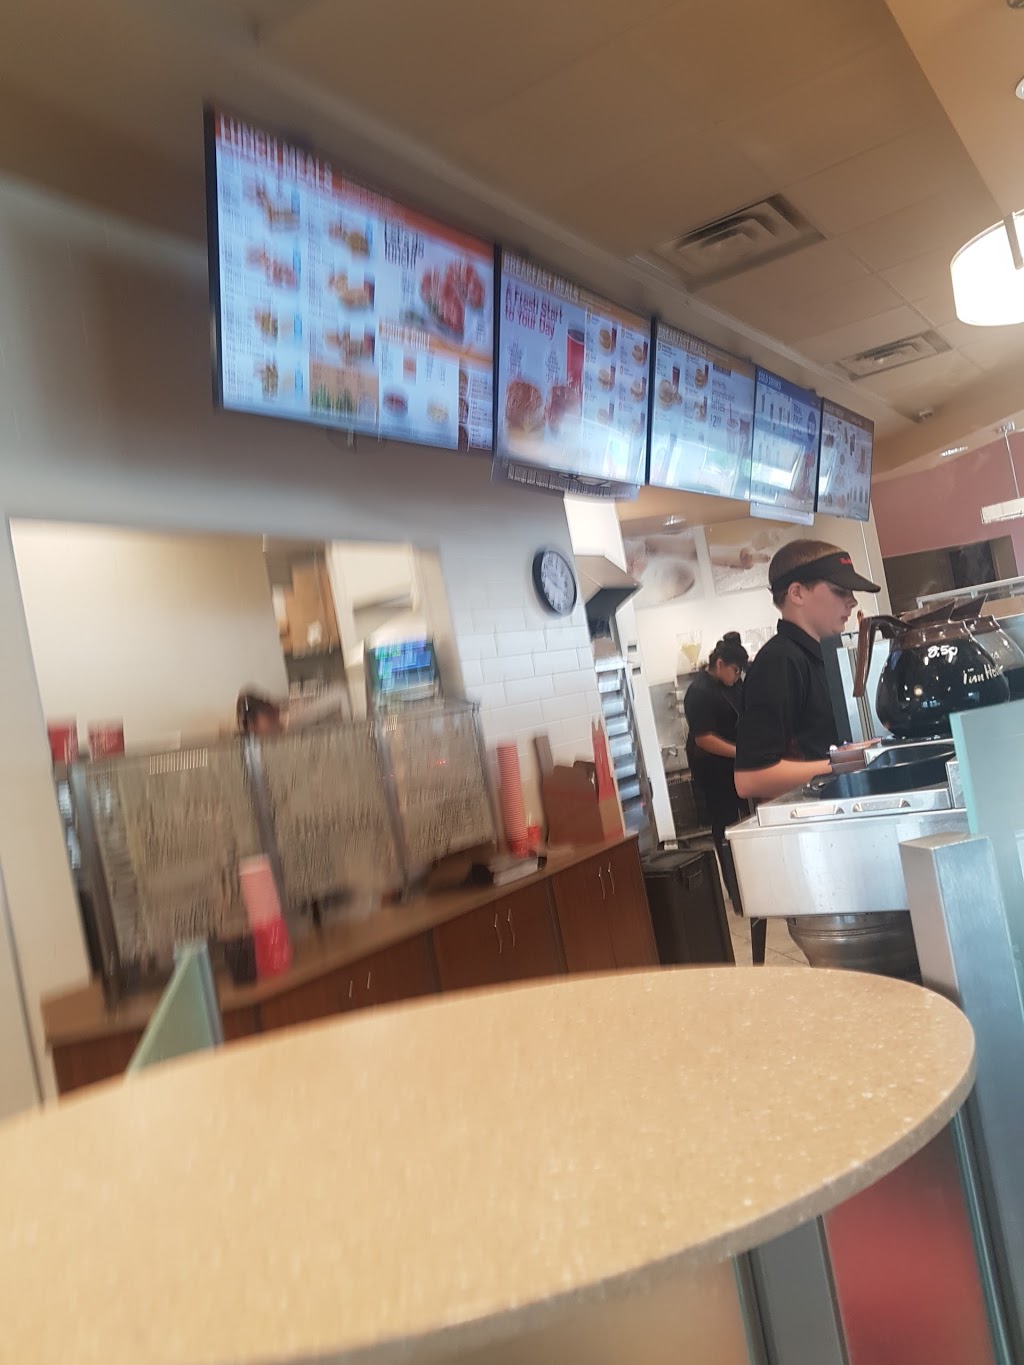 Tim Hortons | 1688 Chiefswood Rd, Ohsweken, ON N0A 1M0, Canada | Phone: (519) 445-4334